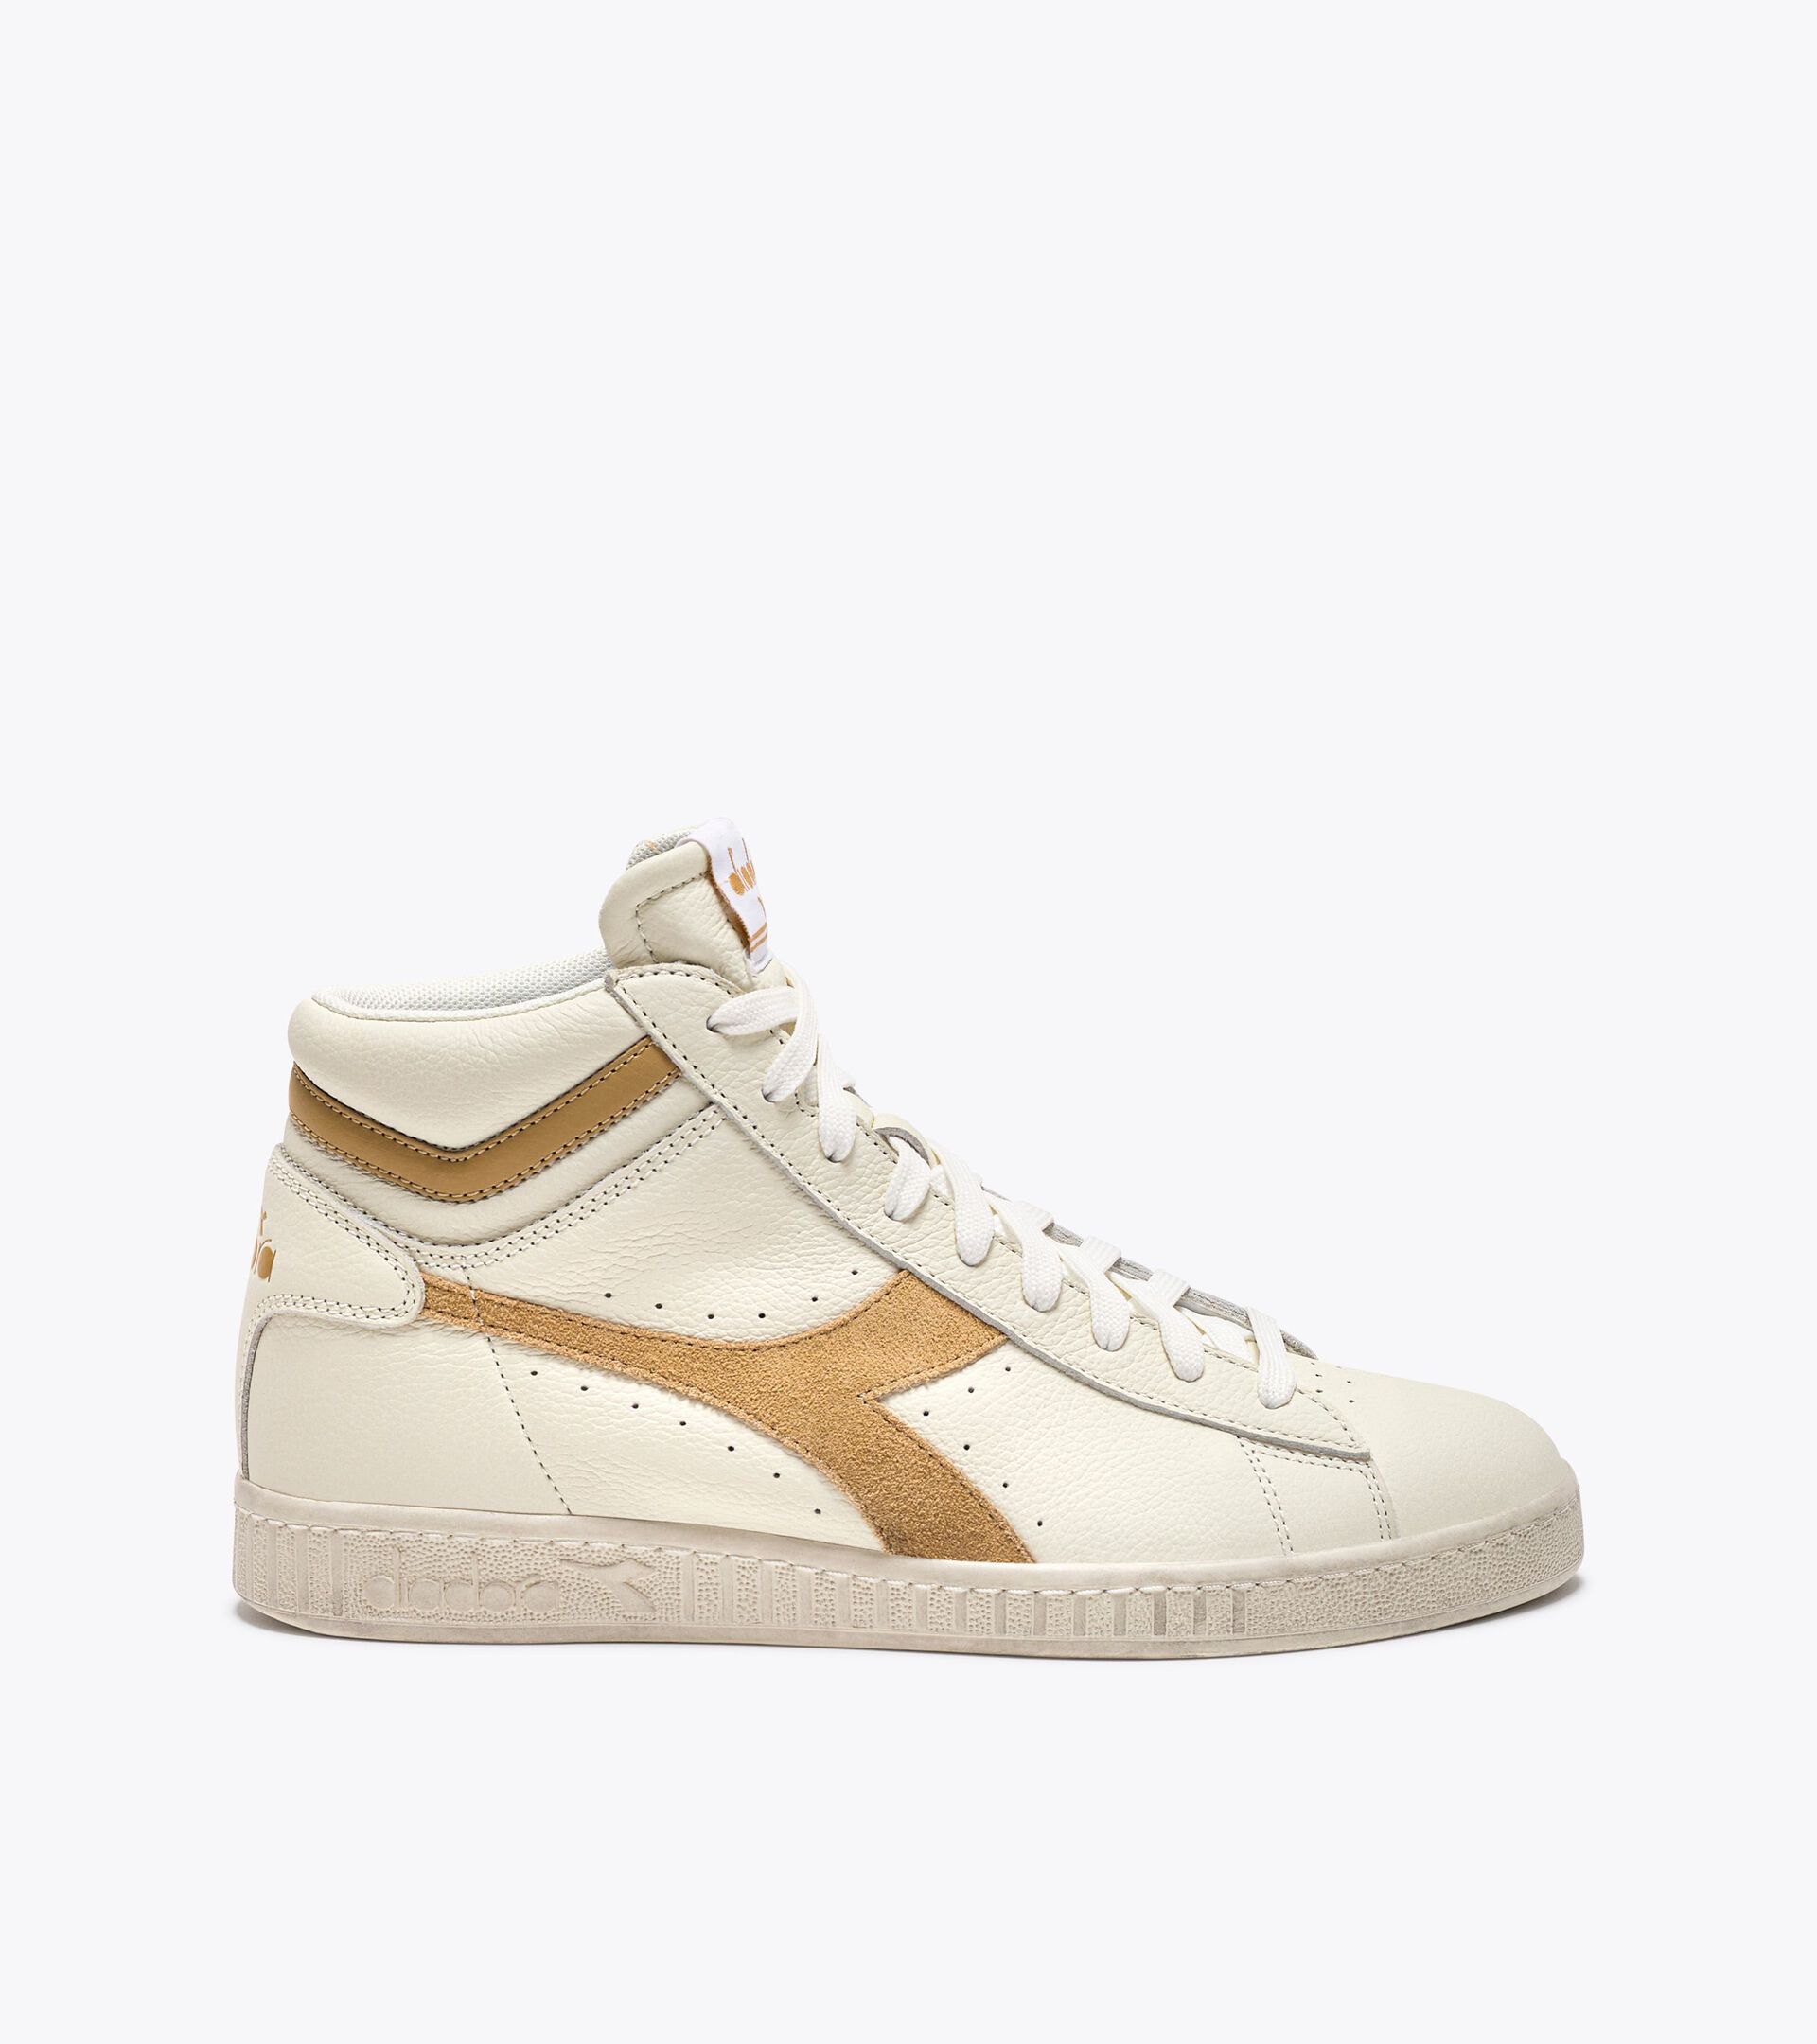 Sporty sneakers - Gender neutral GAME L HIGH WAXED SUEDE POP WHITE/LATTE - Diadora